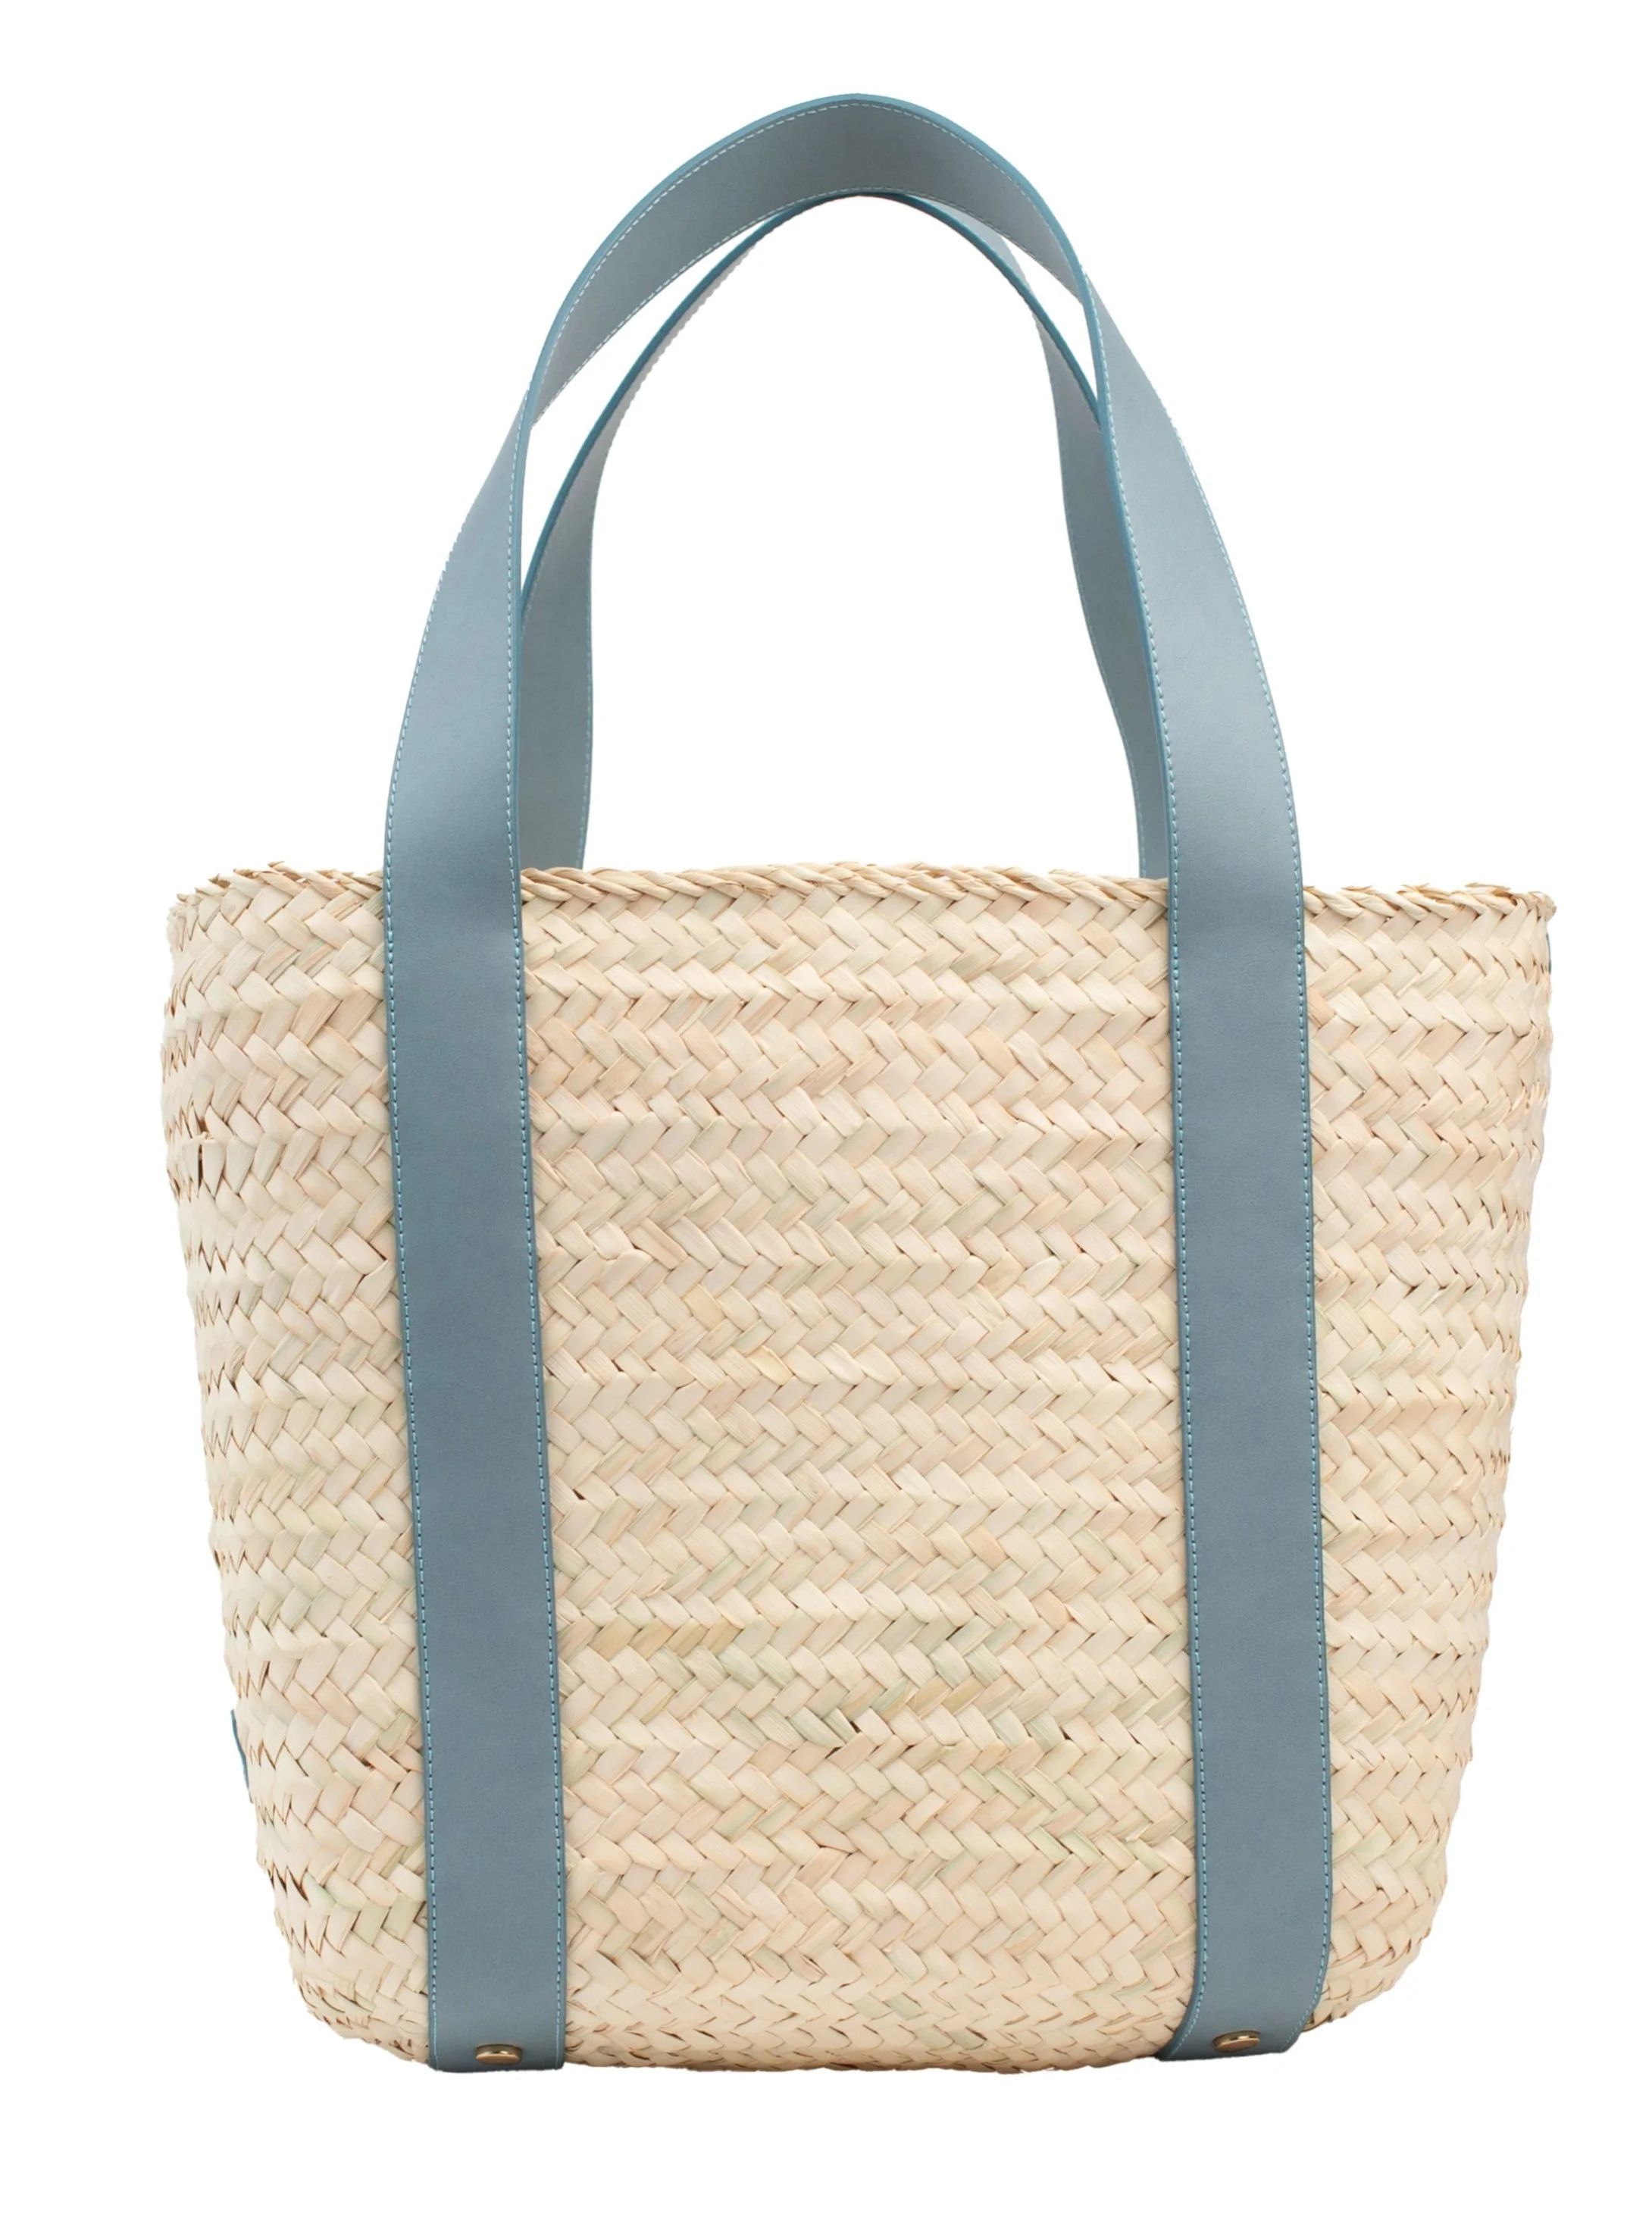 The Maroc Collection | Yasmine Tote in French Blue | Beau & Ro